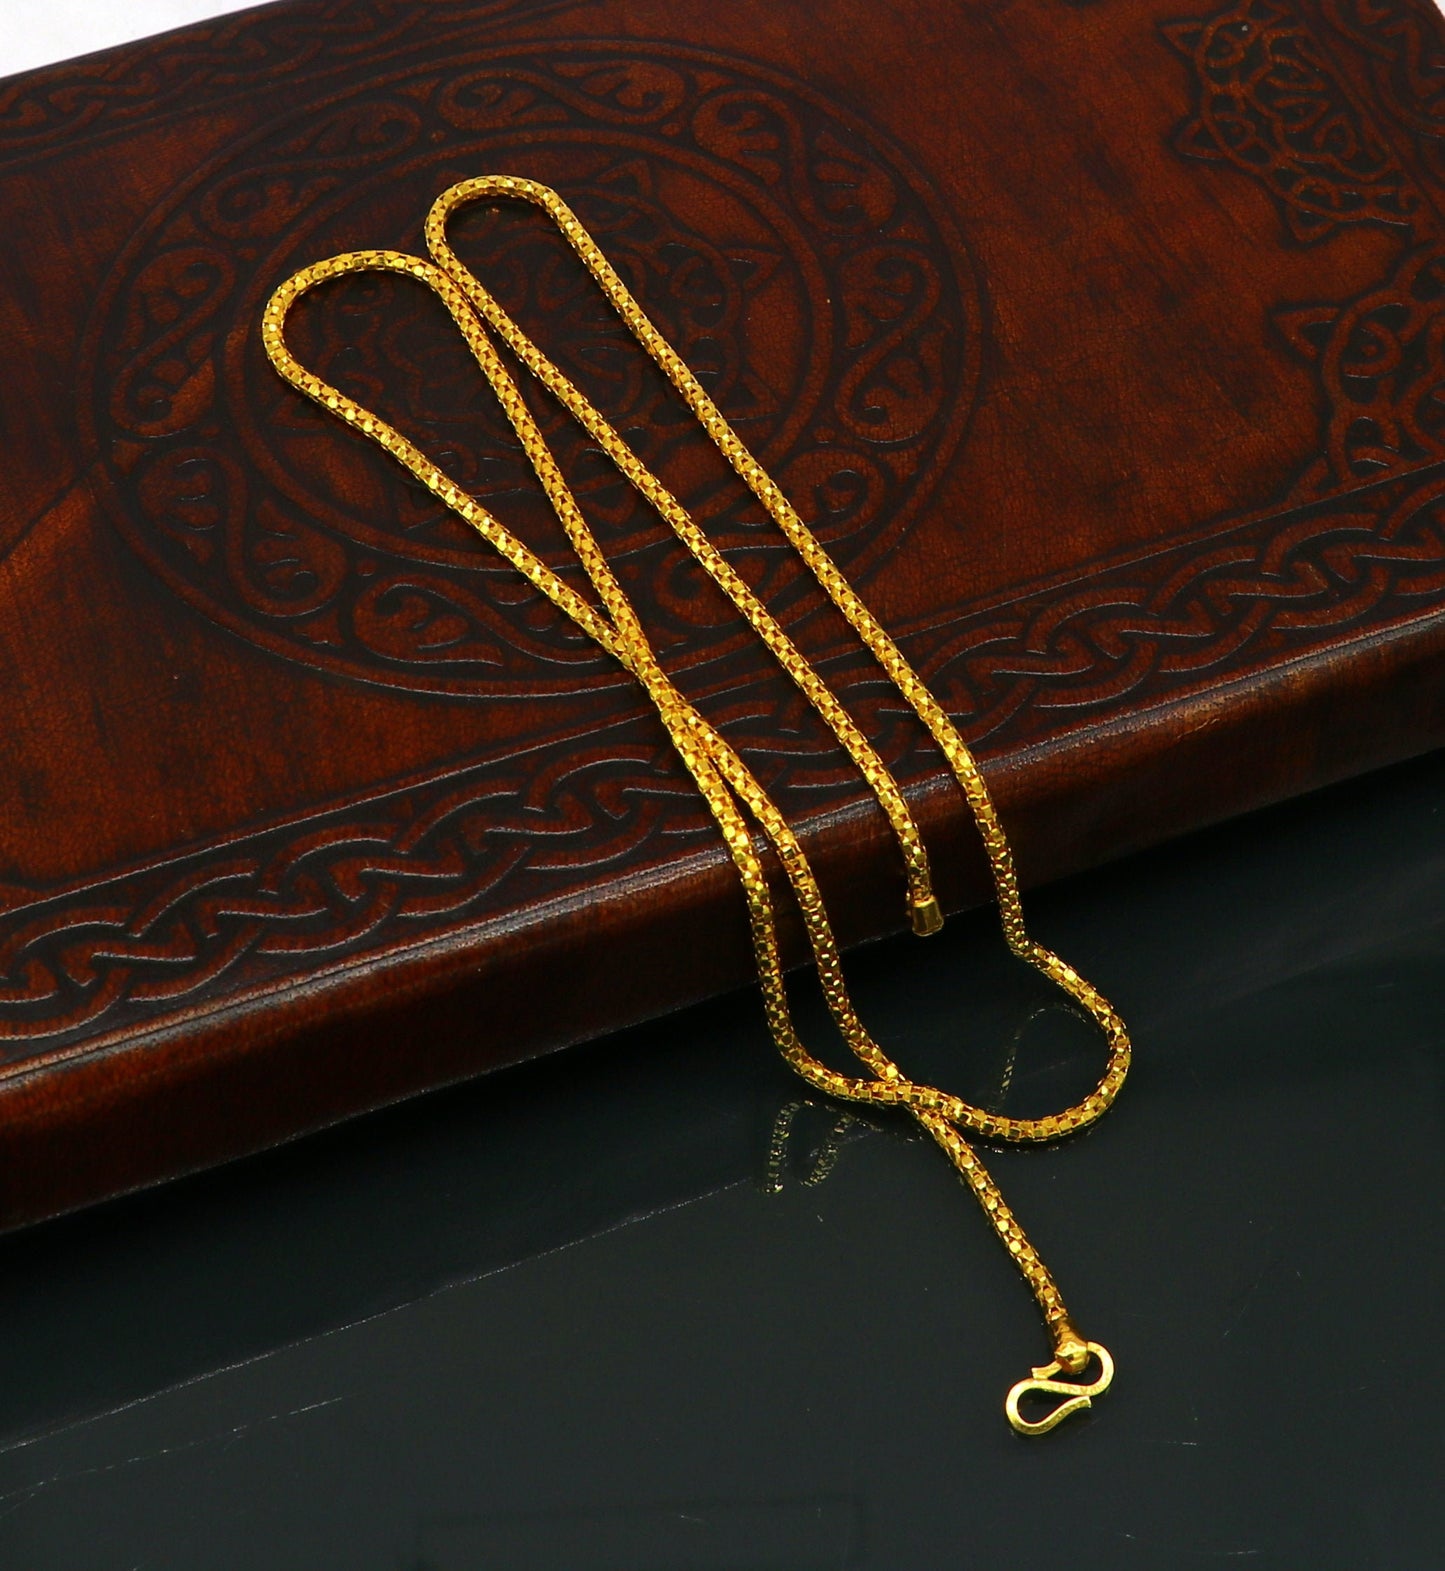 22 kt yellow gold customized unique stylish spotted flexible chain necklace, best gifting unisex chain necklace wedding anniversary gift - TRIBAL ORNAMENTS